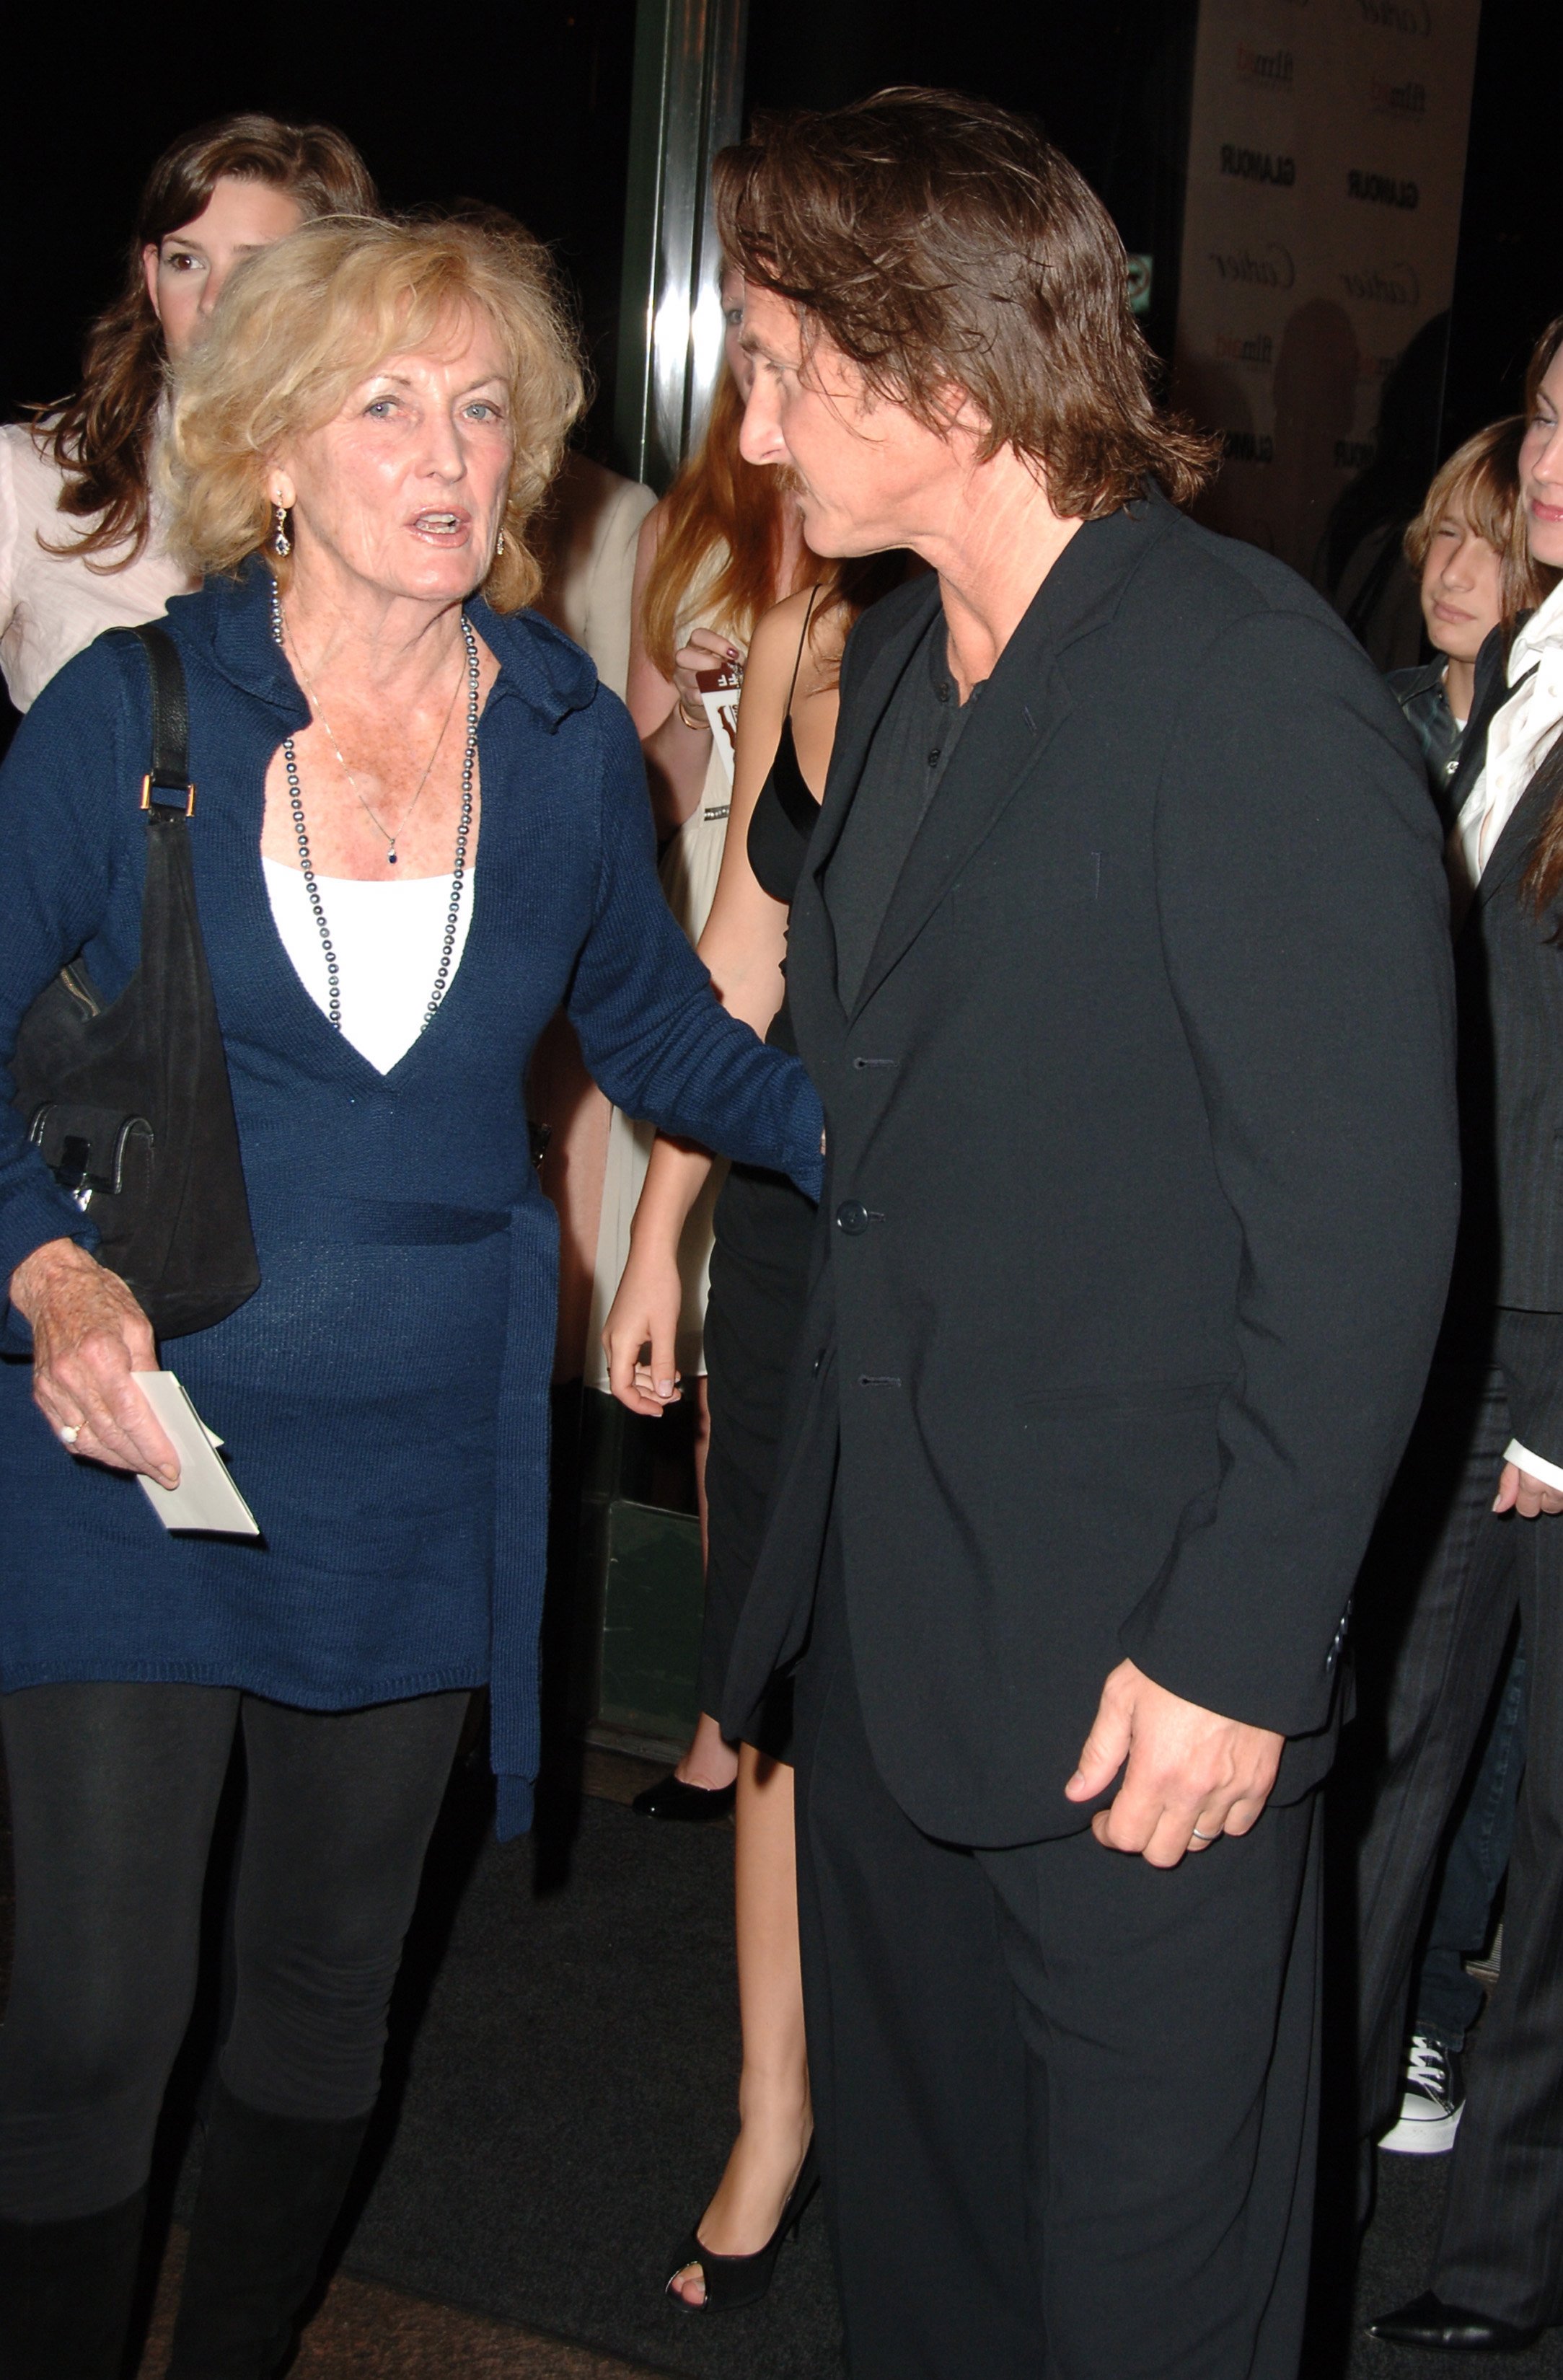 Eileen Ryan and Sean Penn during Glamour Reel Moments Short Film Series Presented by Cartier - Arrivals at Director's Guild in Los Angeles, California, United States. | Source: Getty Images